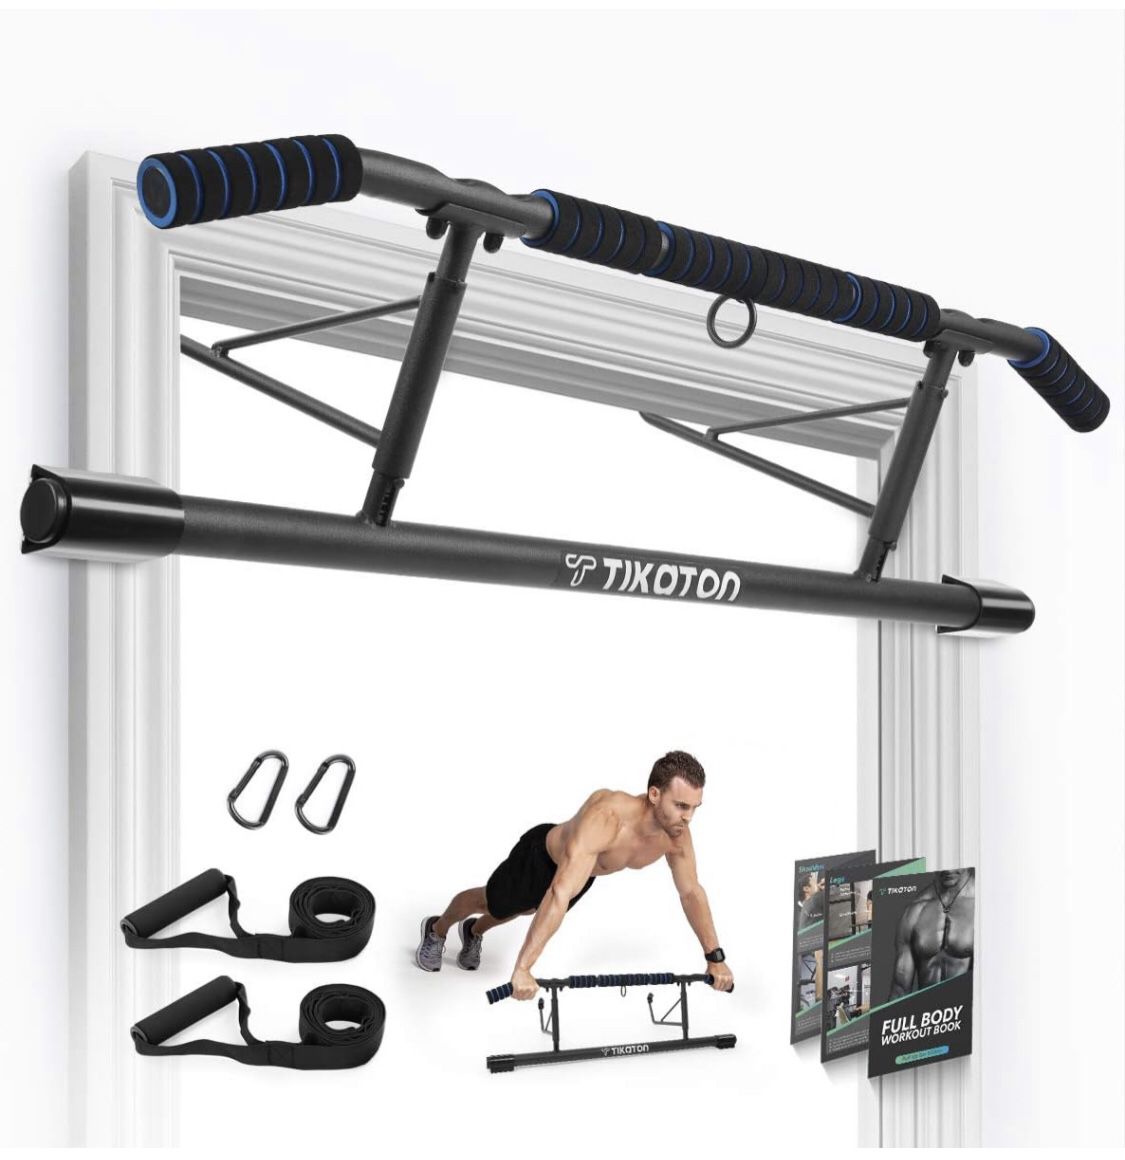 NEW.Pull Up Bar for Doorway - Angled Grip Home Gym Exercise Equipment (111&peoria ave)